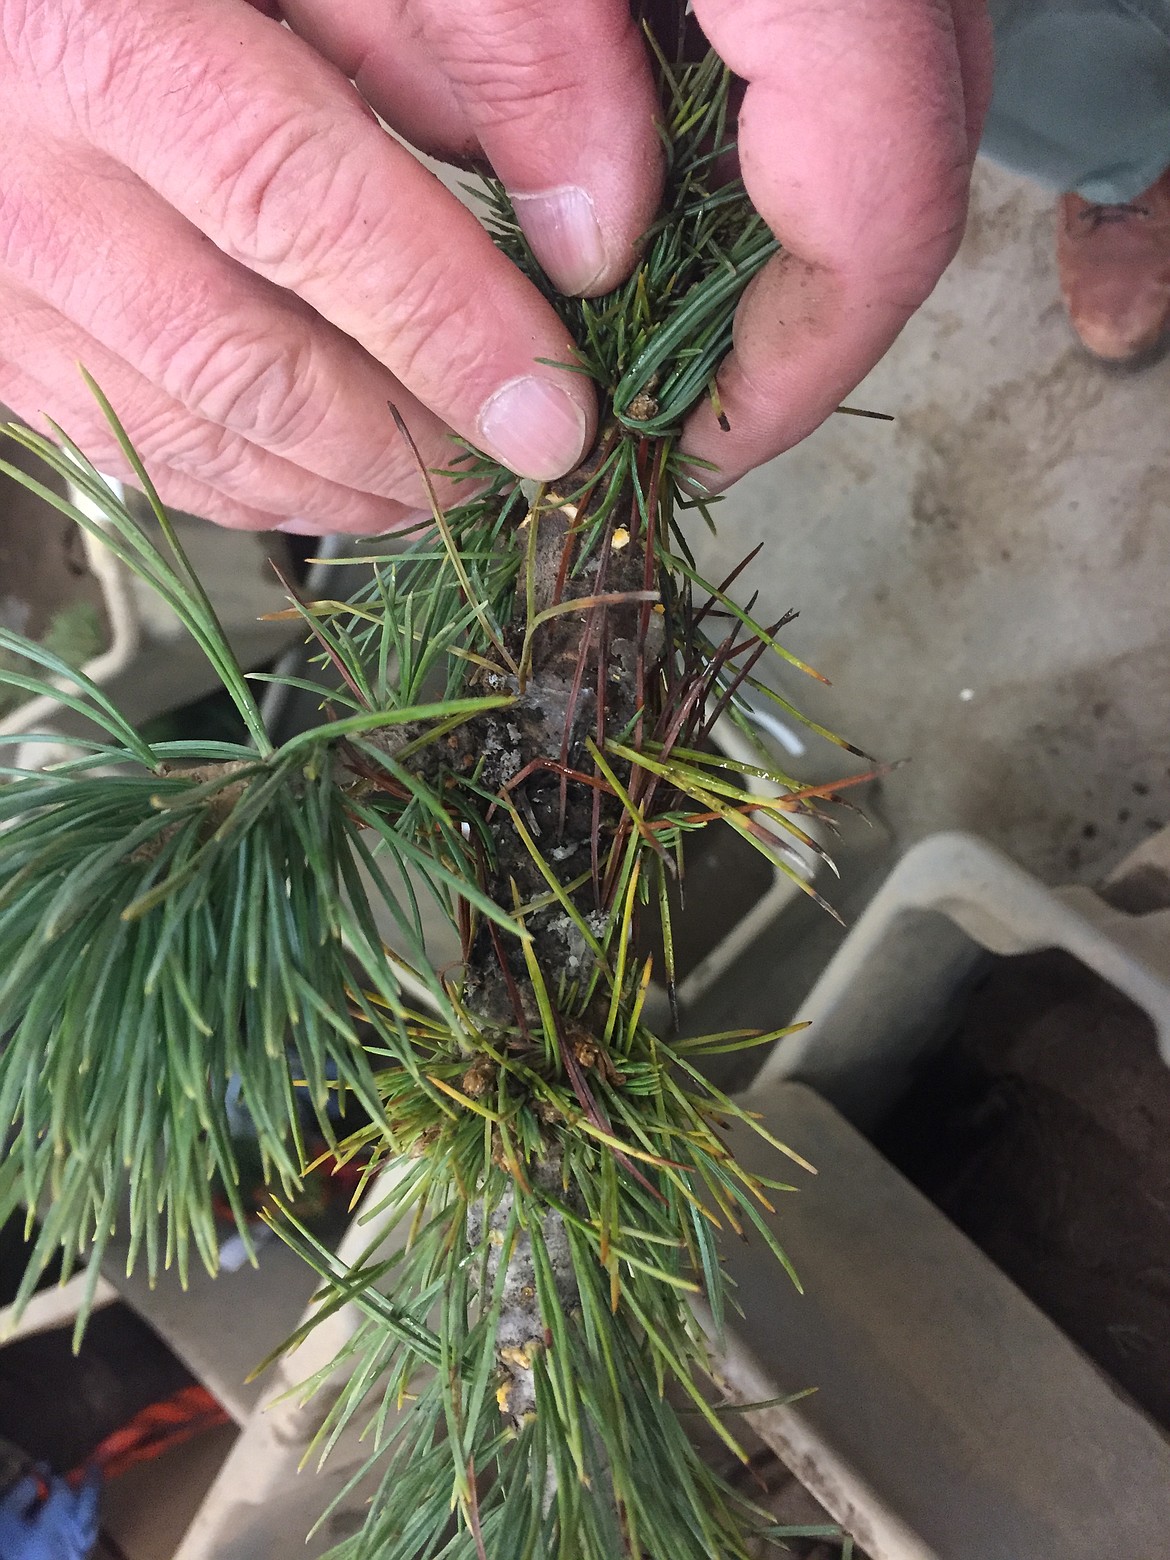 Aram Eramian points out the blister rust on a whitebark pine seedling. The seedlings are grown to be resistent to the disease, but it is not always effective. (JENNIFER PASSARO/Press)